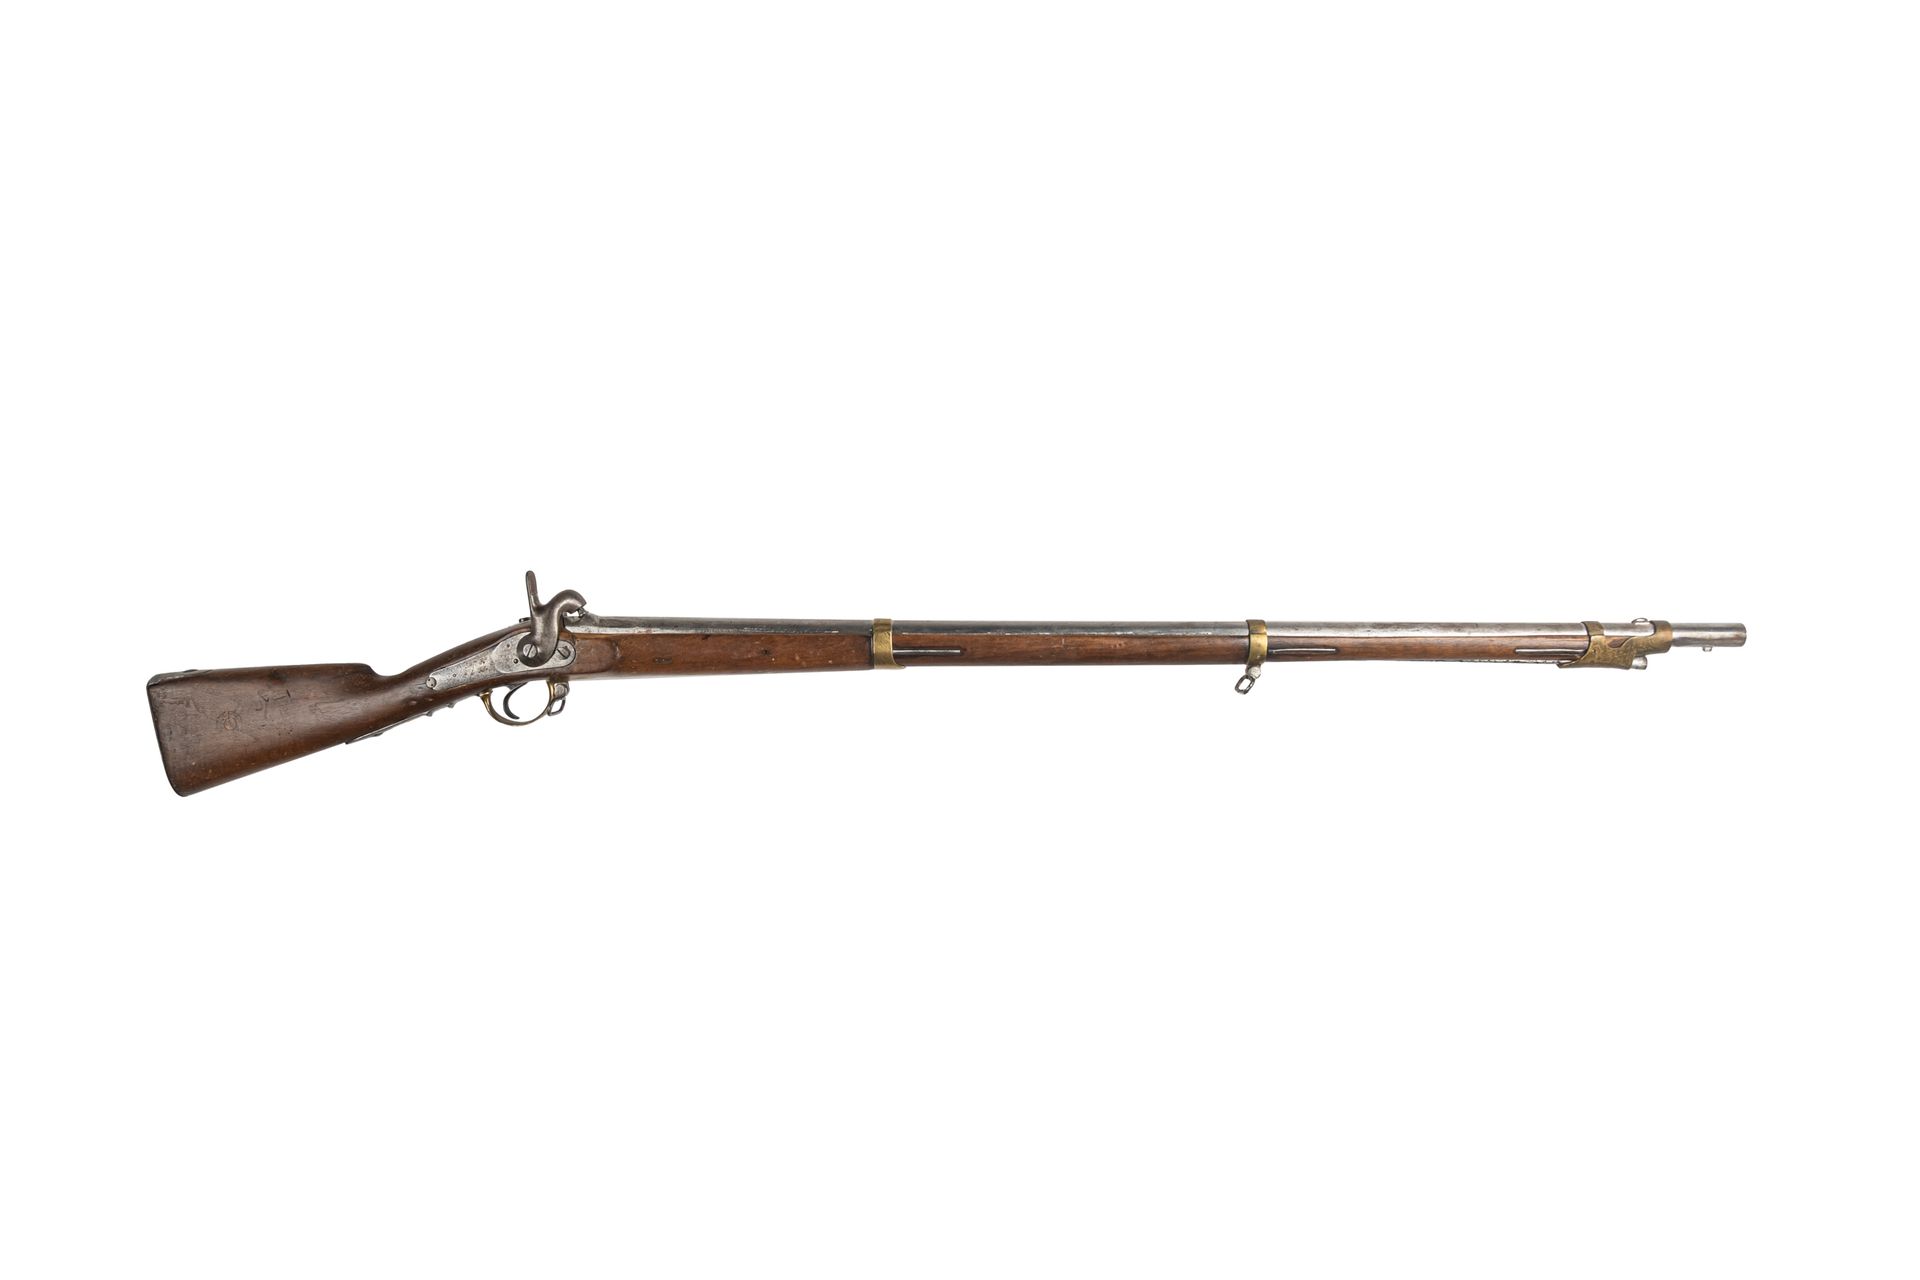 Null Percussion rifle model 1840 of navy. 

Round barrel with sides with the thu&hellip;